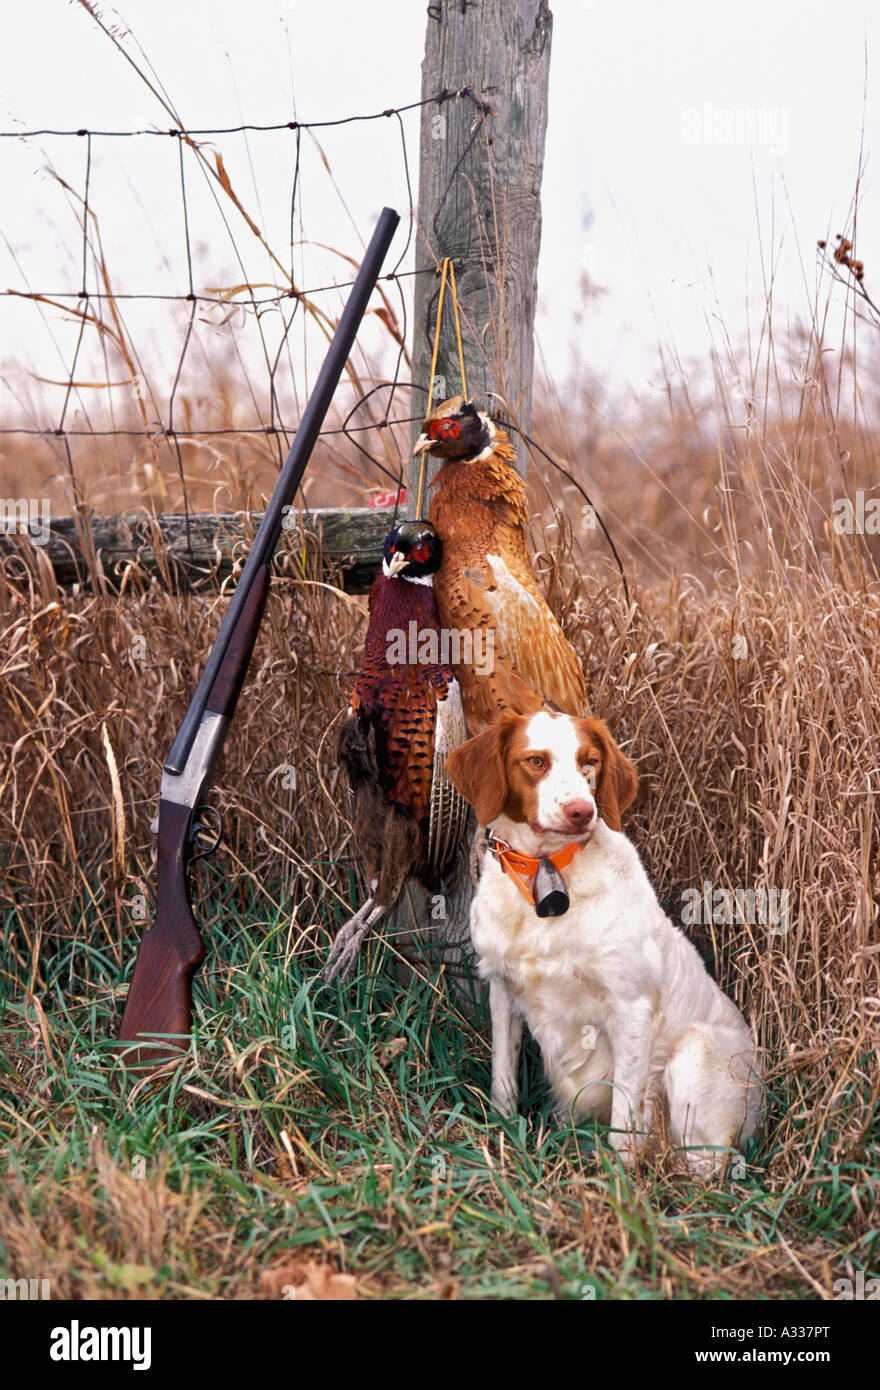 Old Lefever 20 Gauge Double Barrel Shotgun Leaning Against Fence Post with Pair of Pheasants and Brittany Bird Dog Indiana Stock Photo